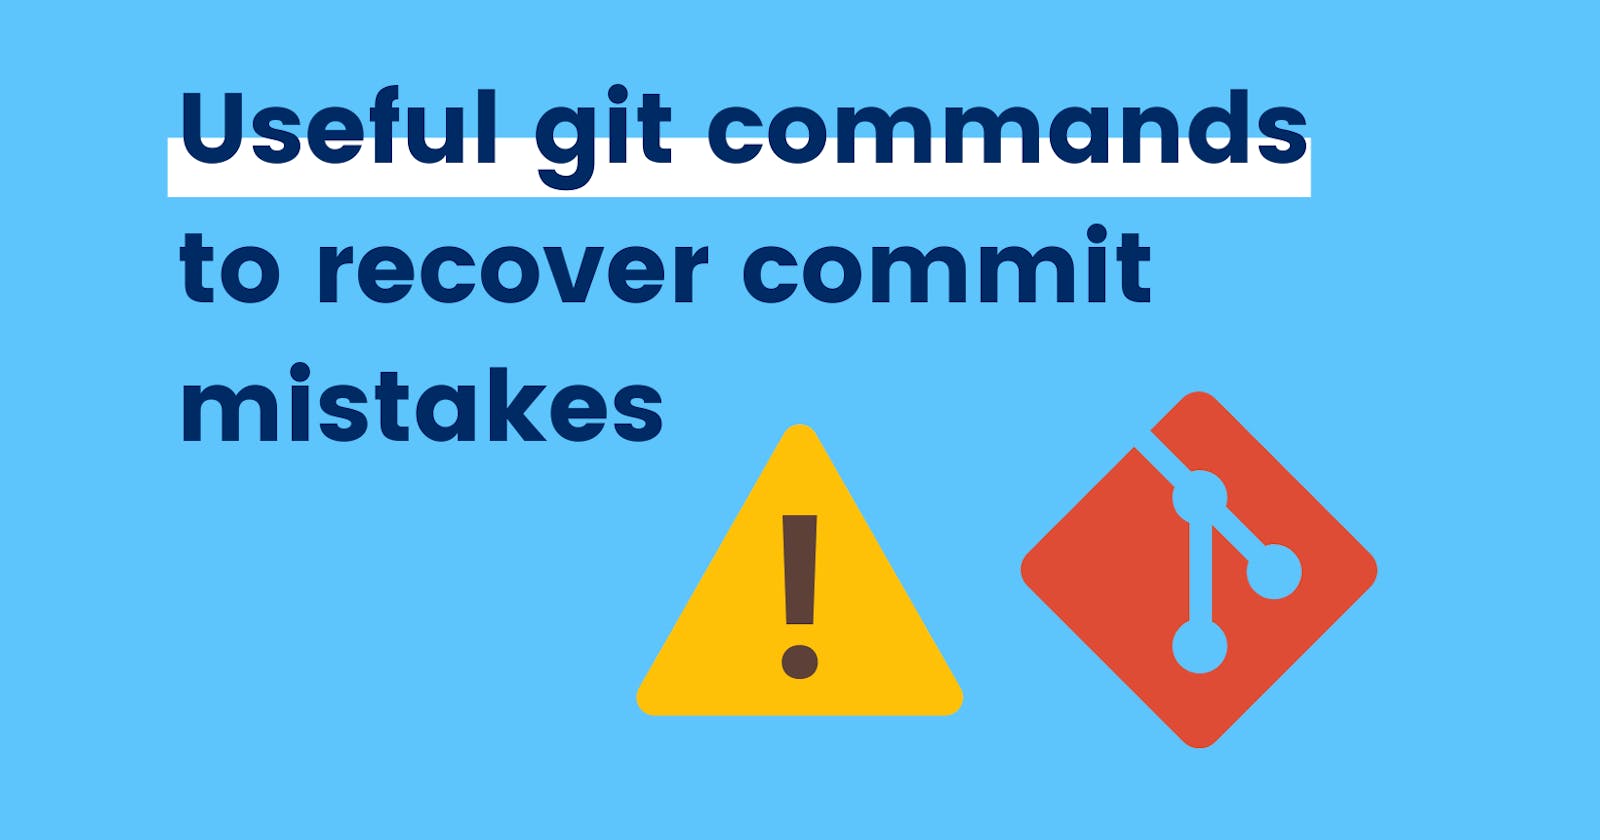 Useful git commands to recover commit mistakes